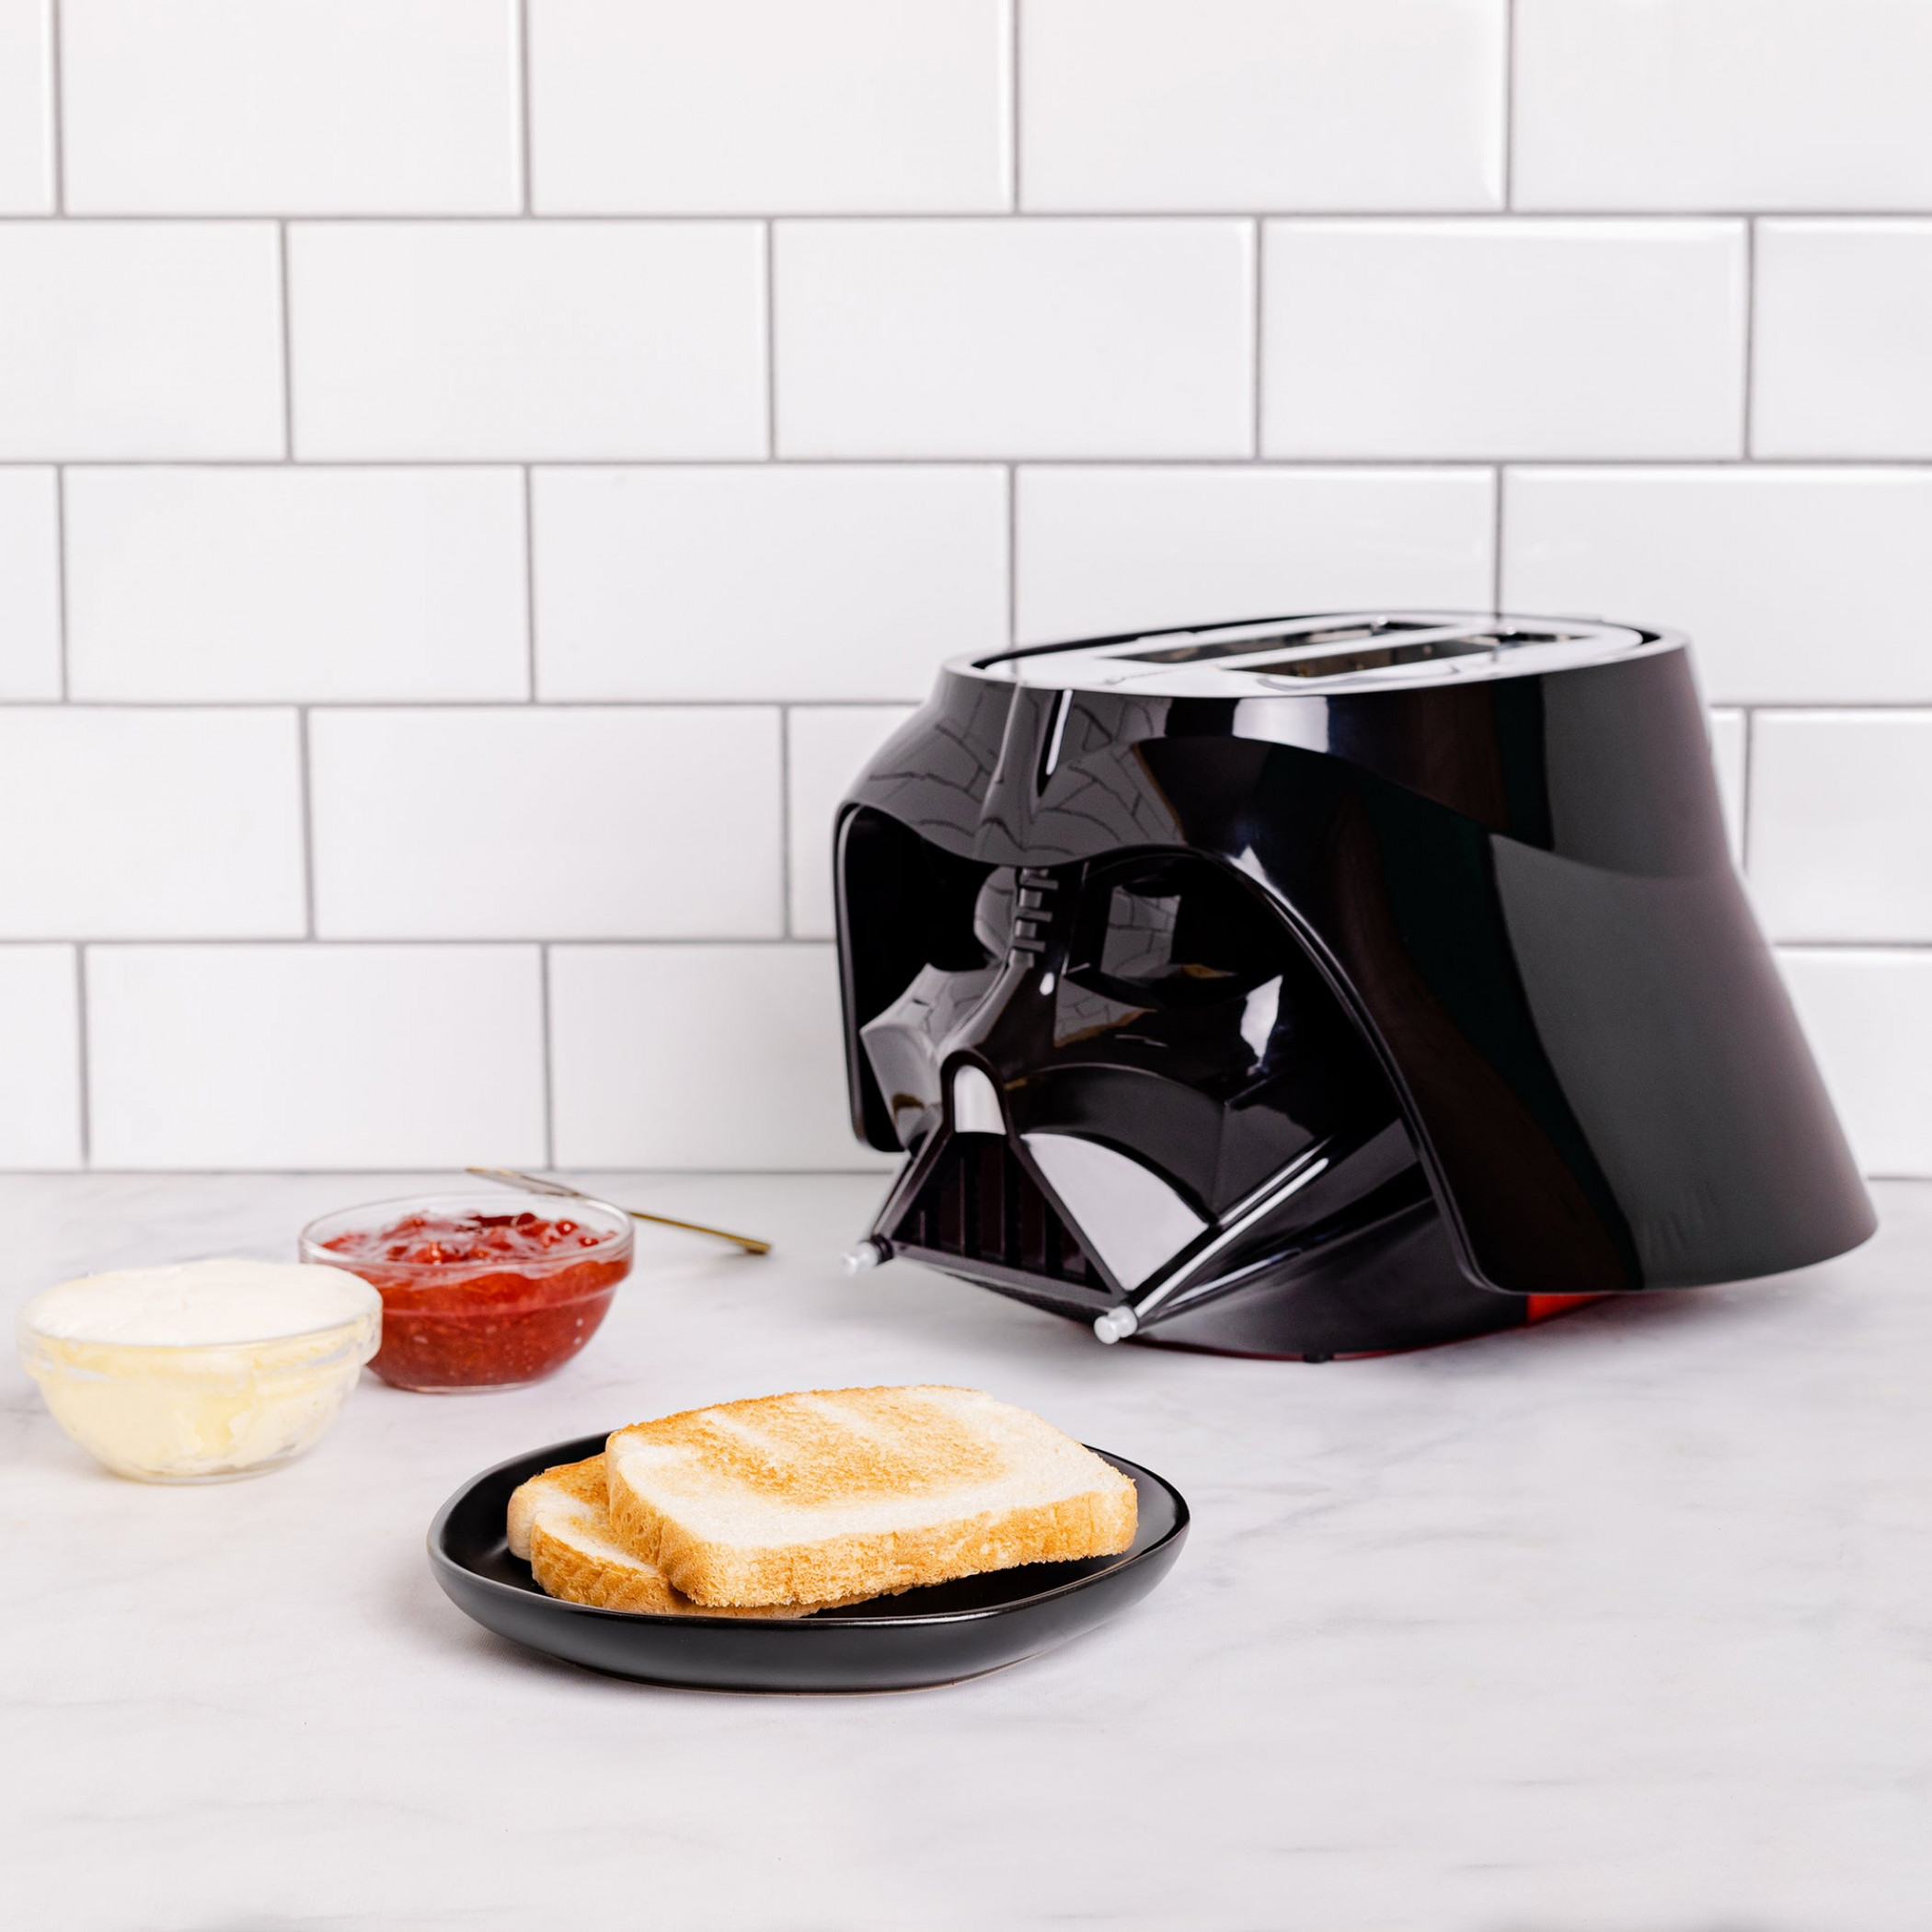 Star Wars Darth Vader Halo Toasters With Lights and Sounds